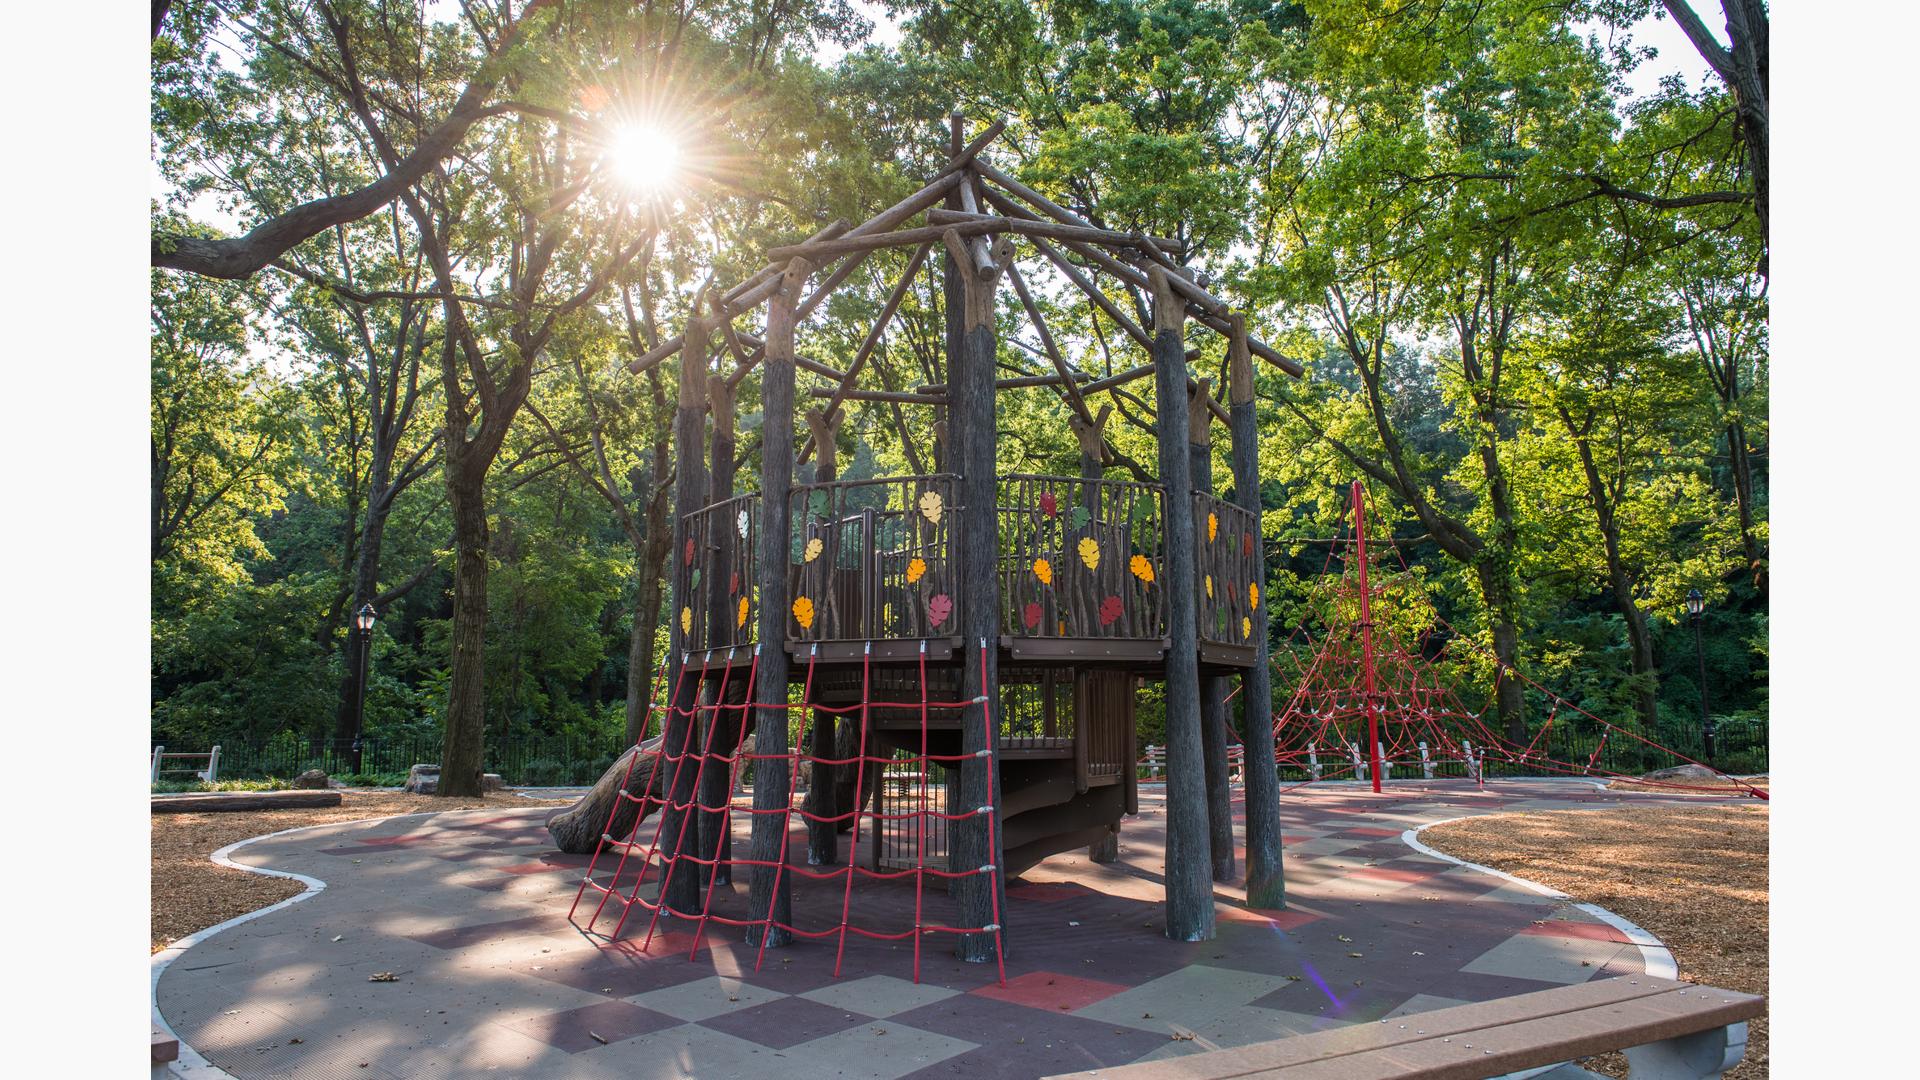 Sun appearing through the trees on a nature-inspired fort-like tower playground . A red triangle-shaped climbing net is in the background. 